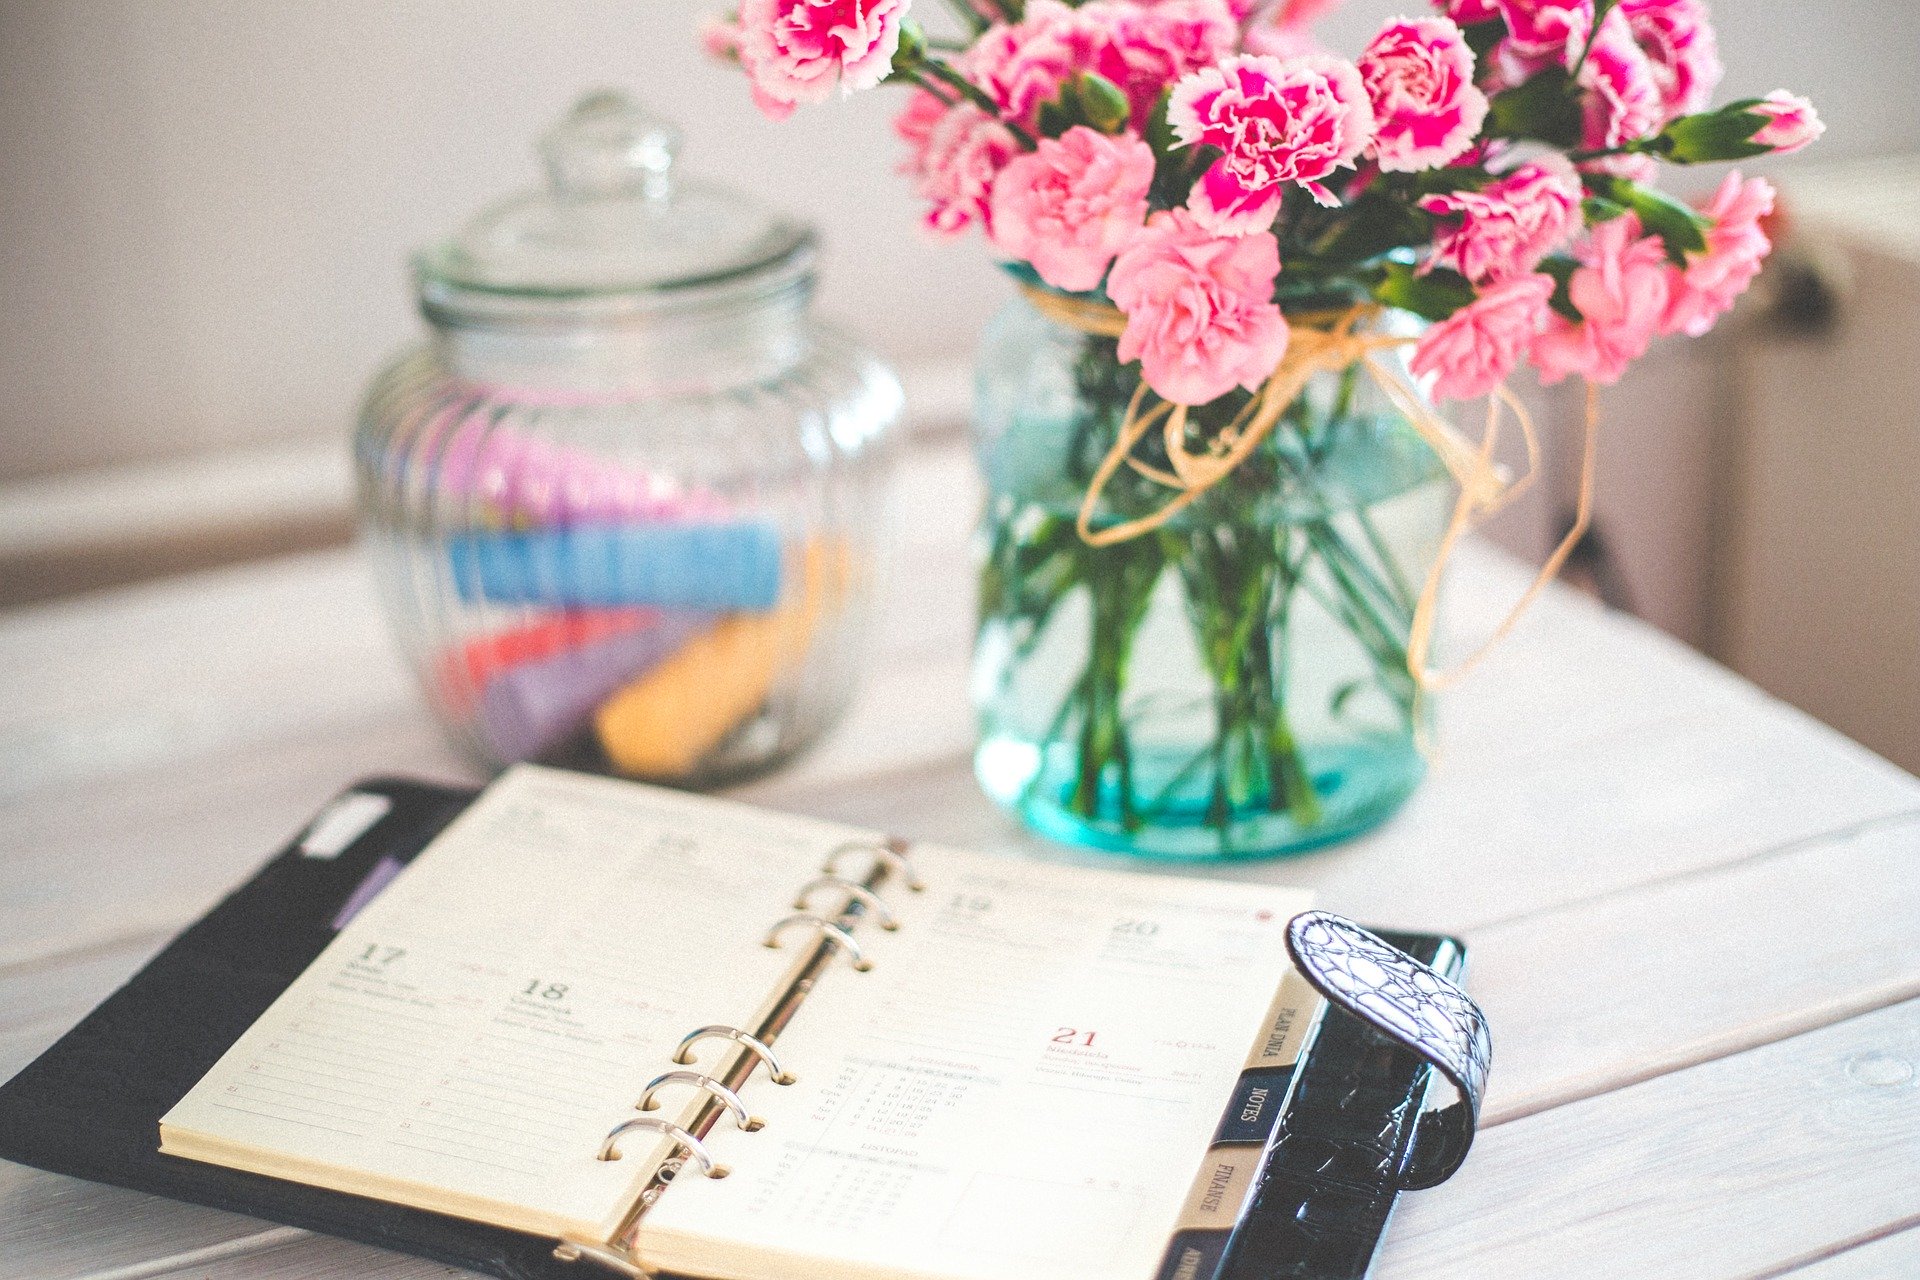 Pink Flowers Sitting on Desk with Daily Planner